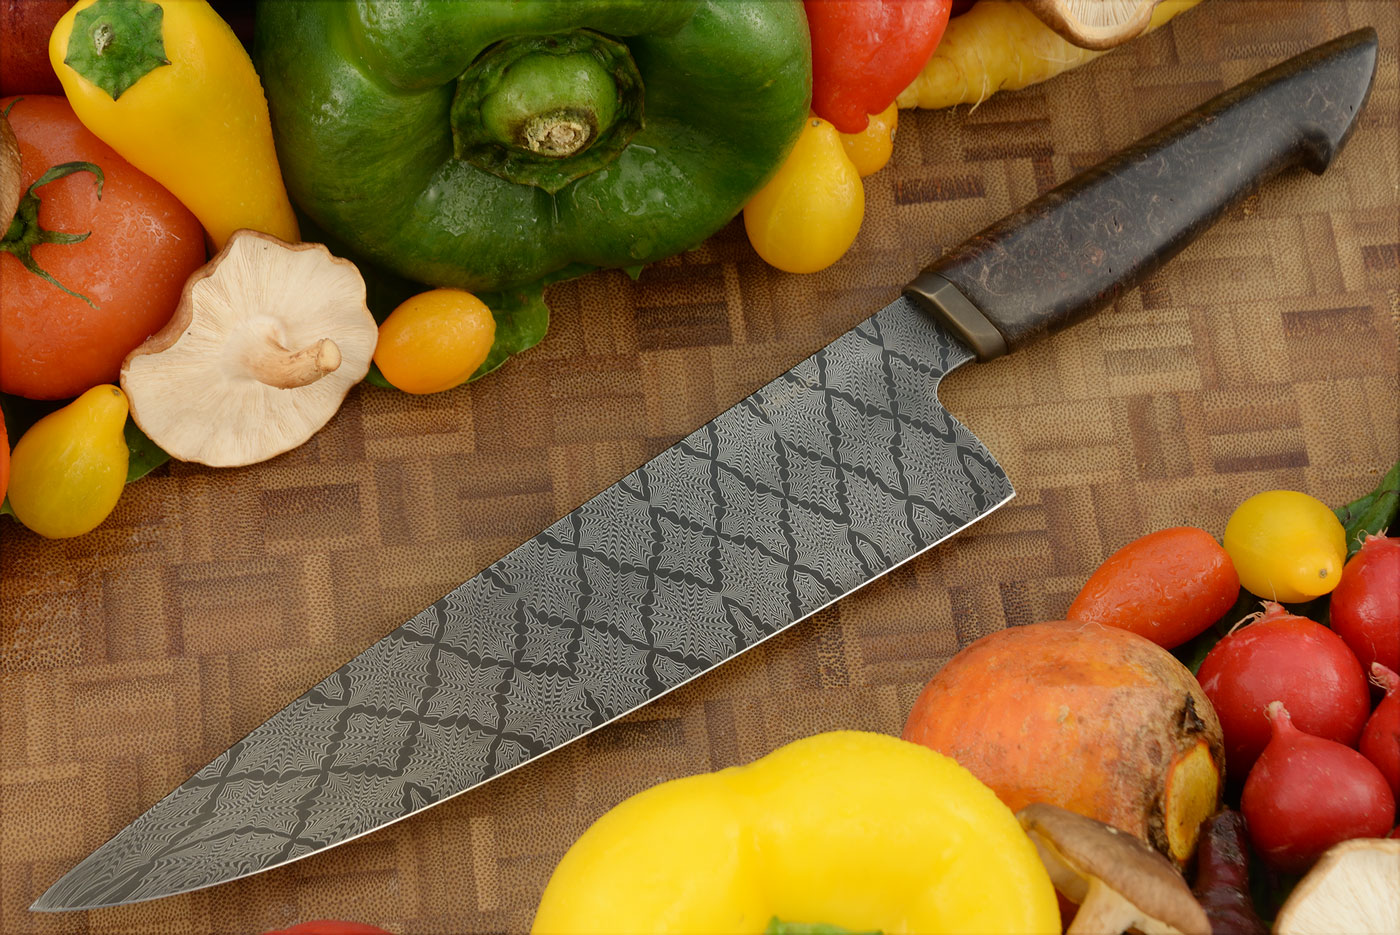 Mosiac Damascus Chef's Knife (8 in.) with Maple Burl